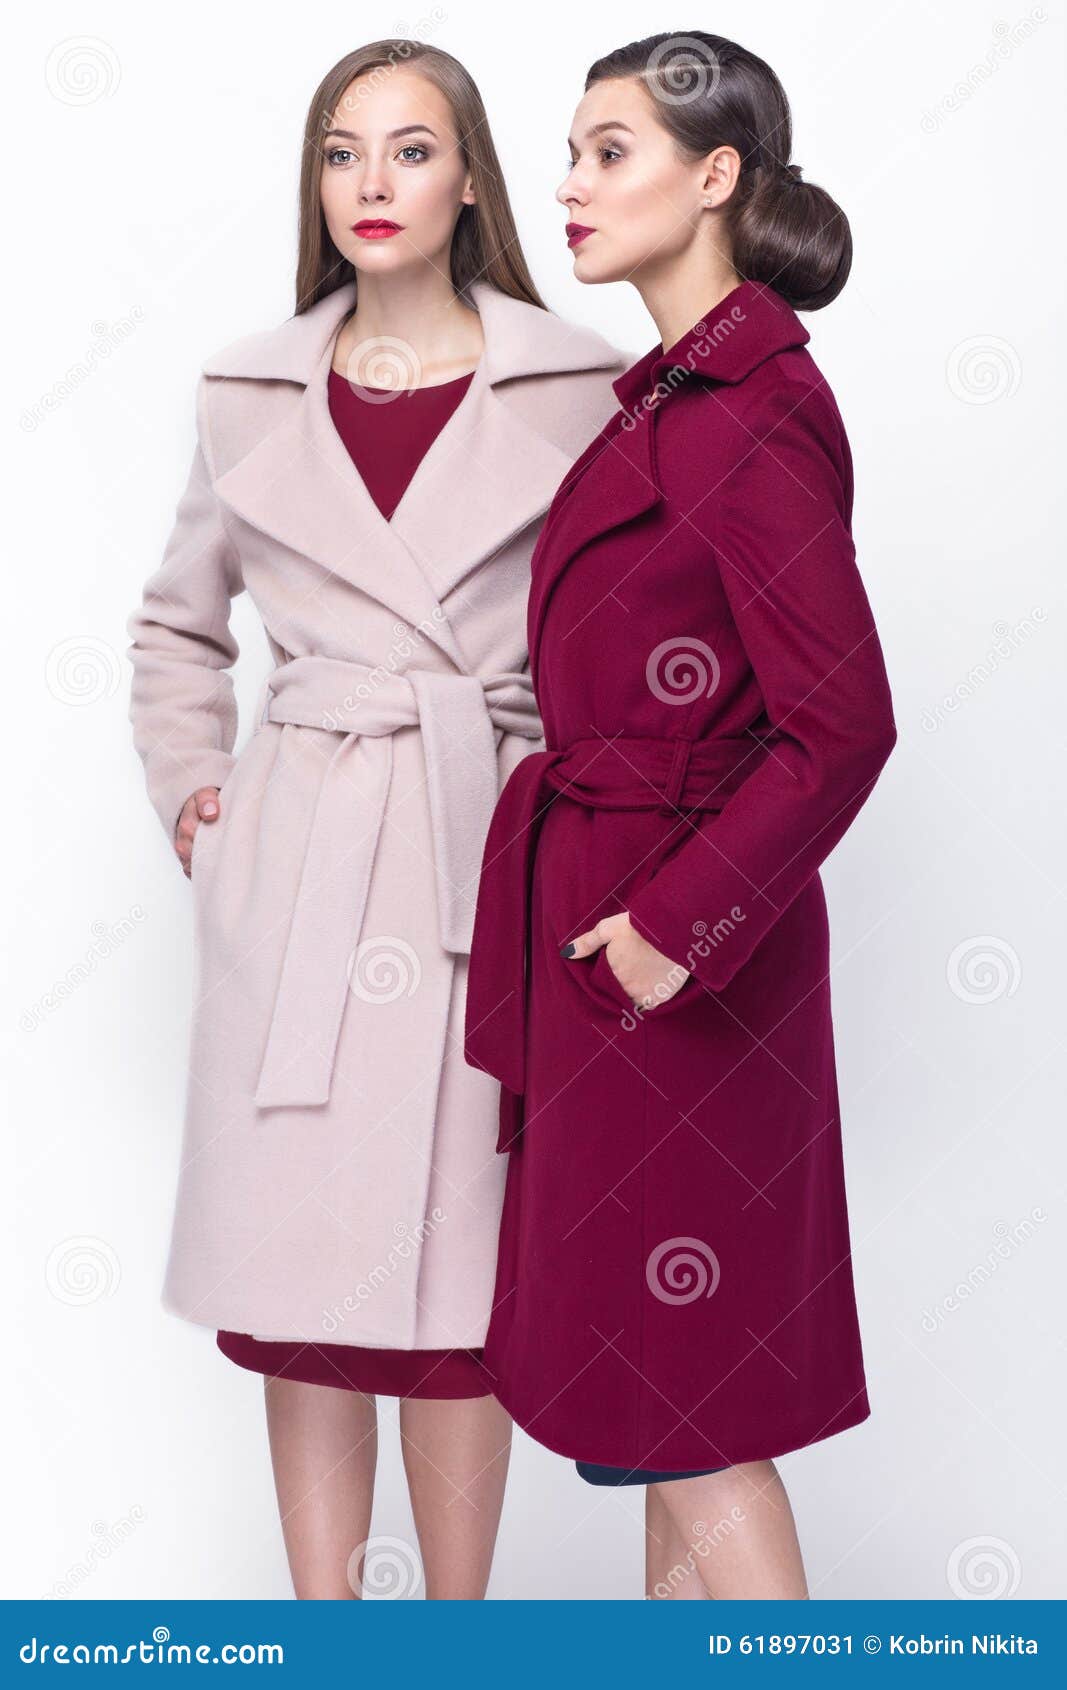 Two Pretty Girls in Fashionable Stylish Clothes Stock Image - Image of ...